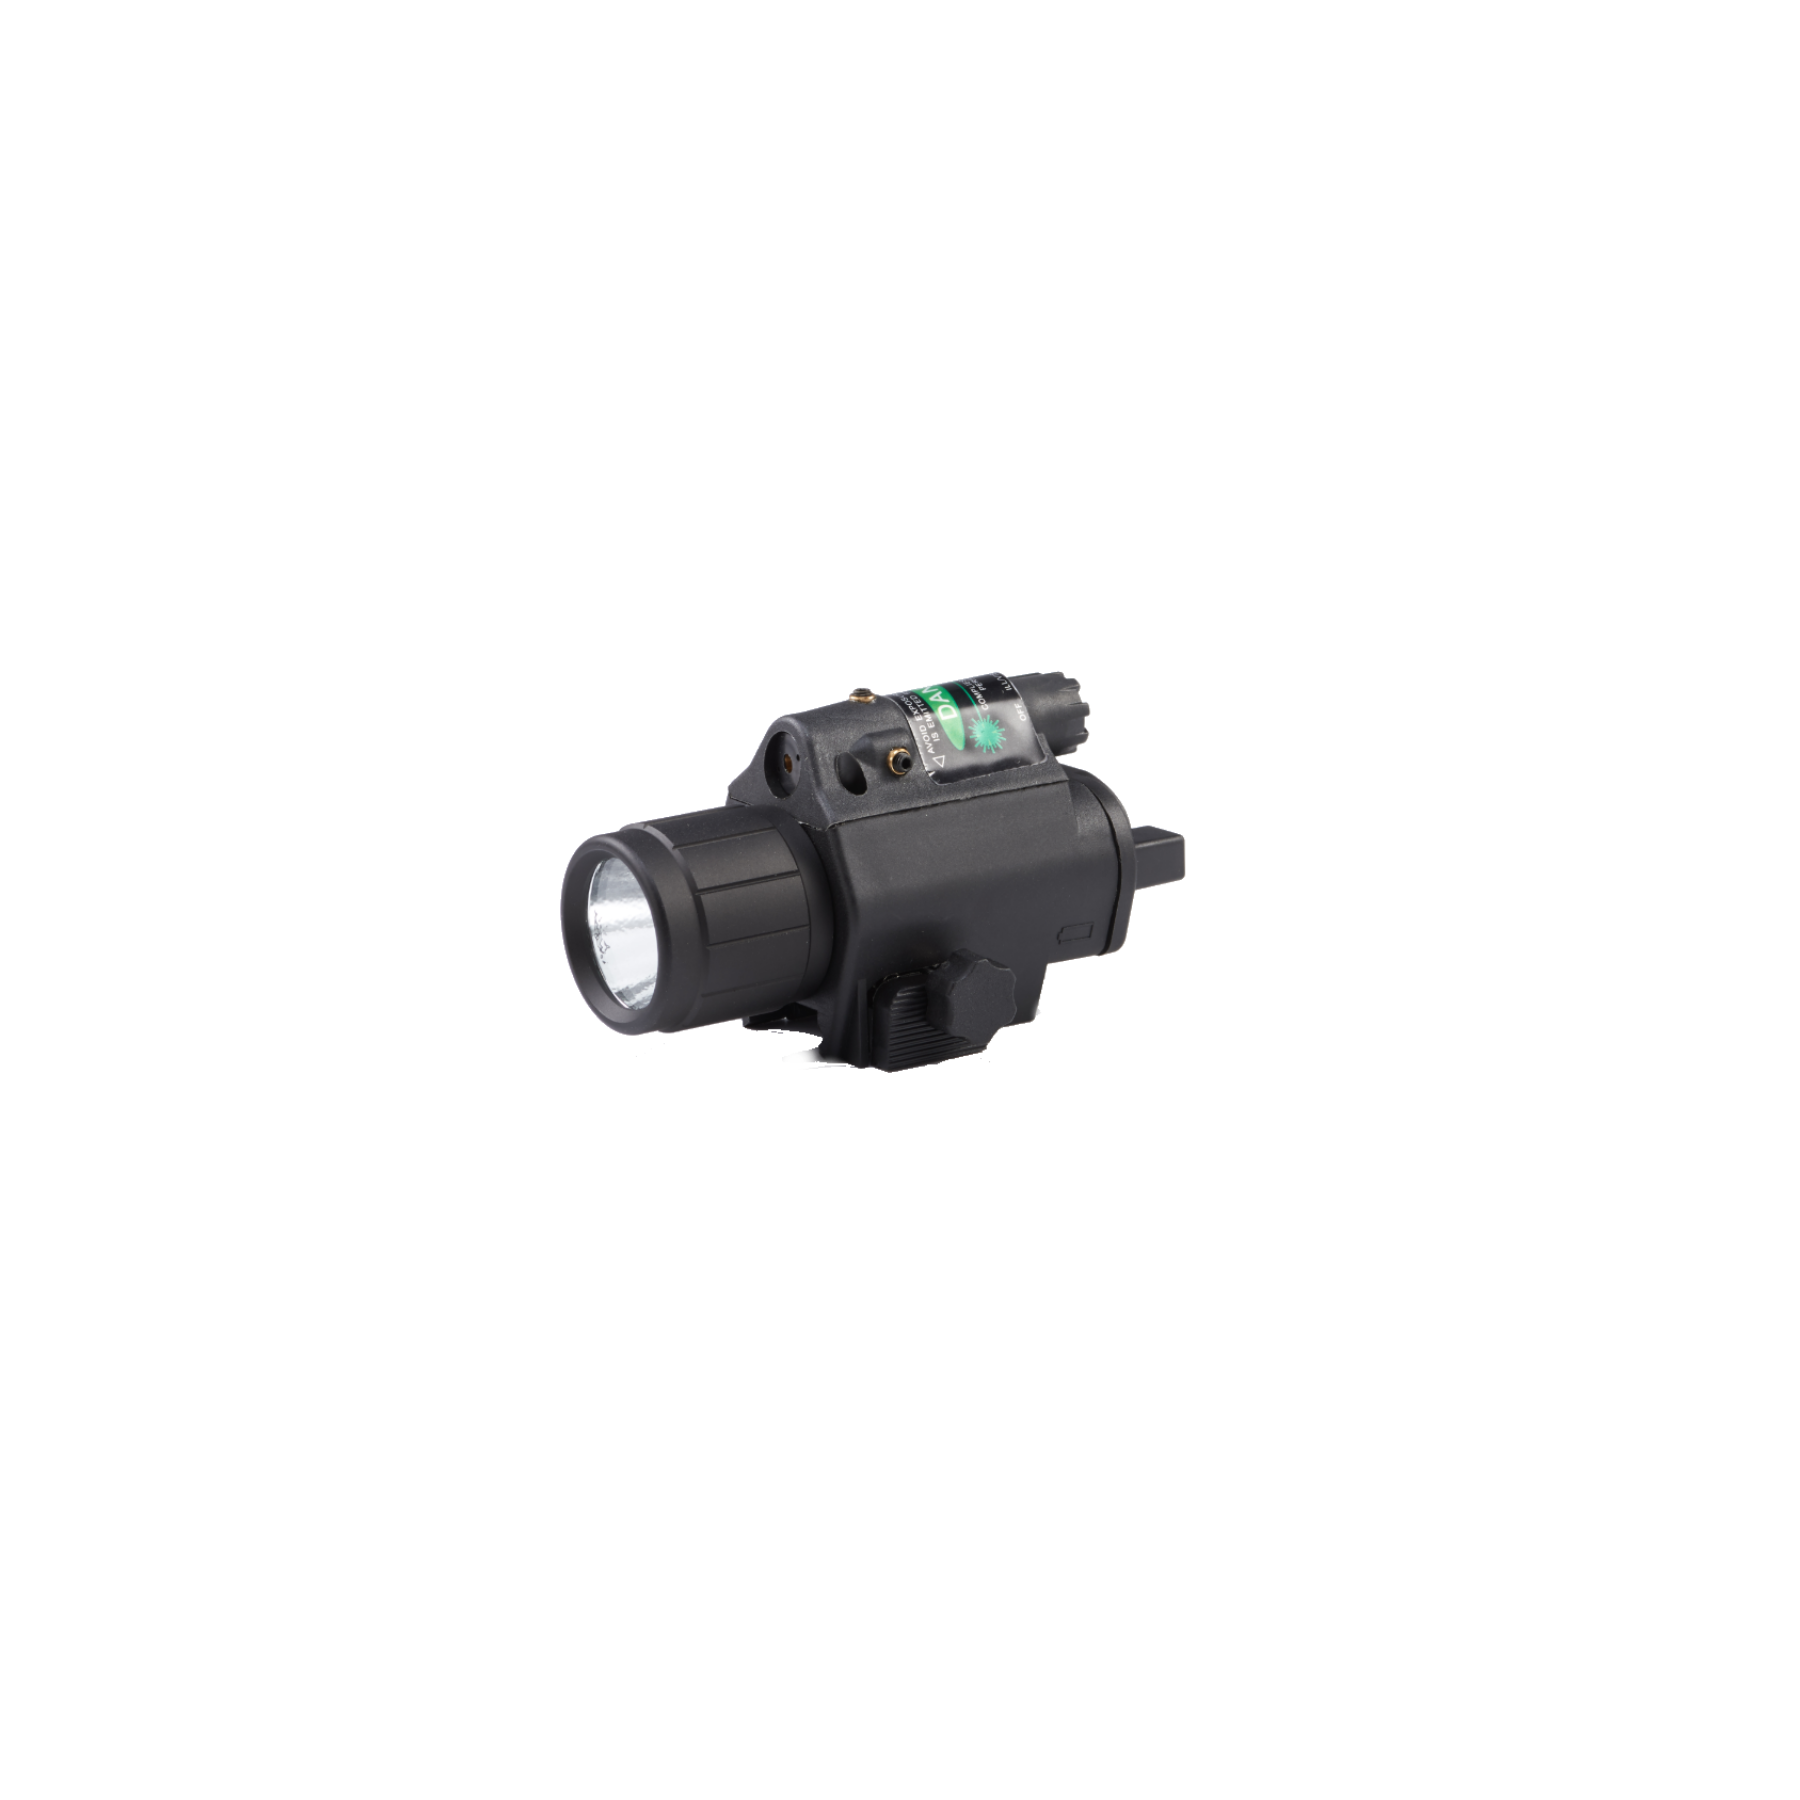 Tactical Flashlight with Green Laser